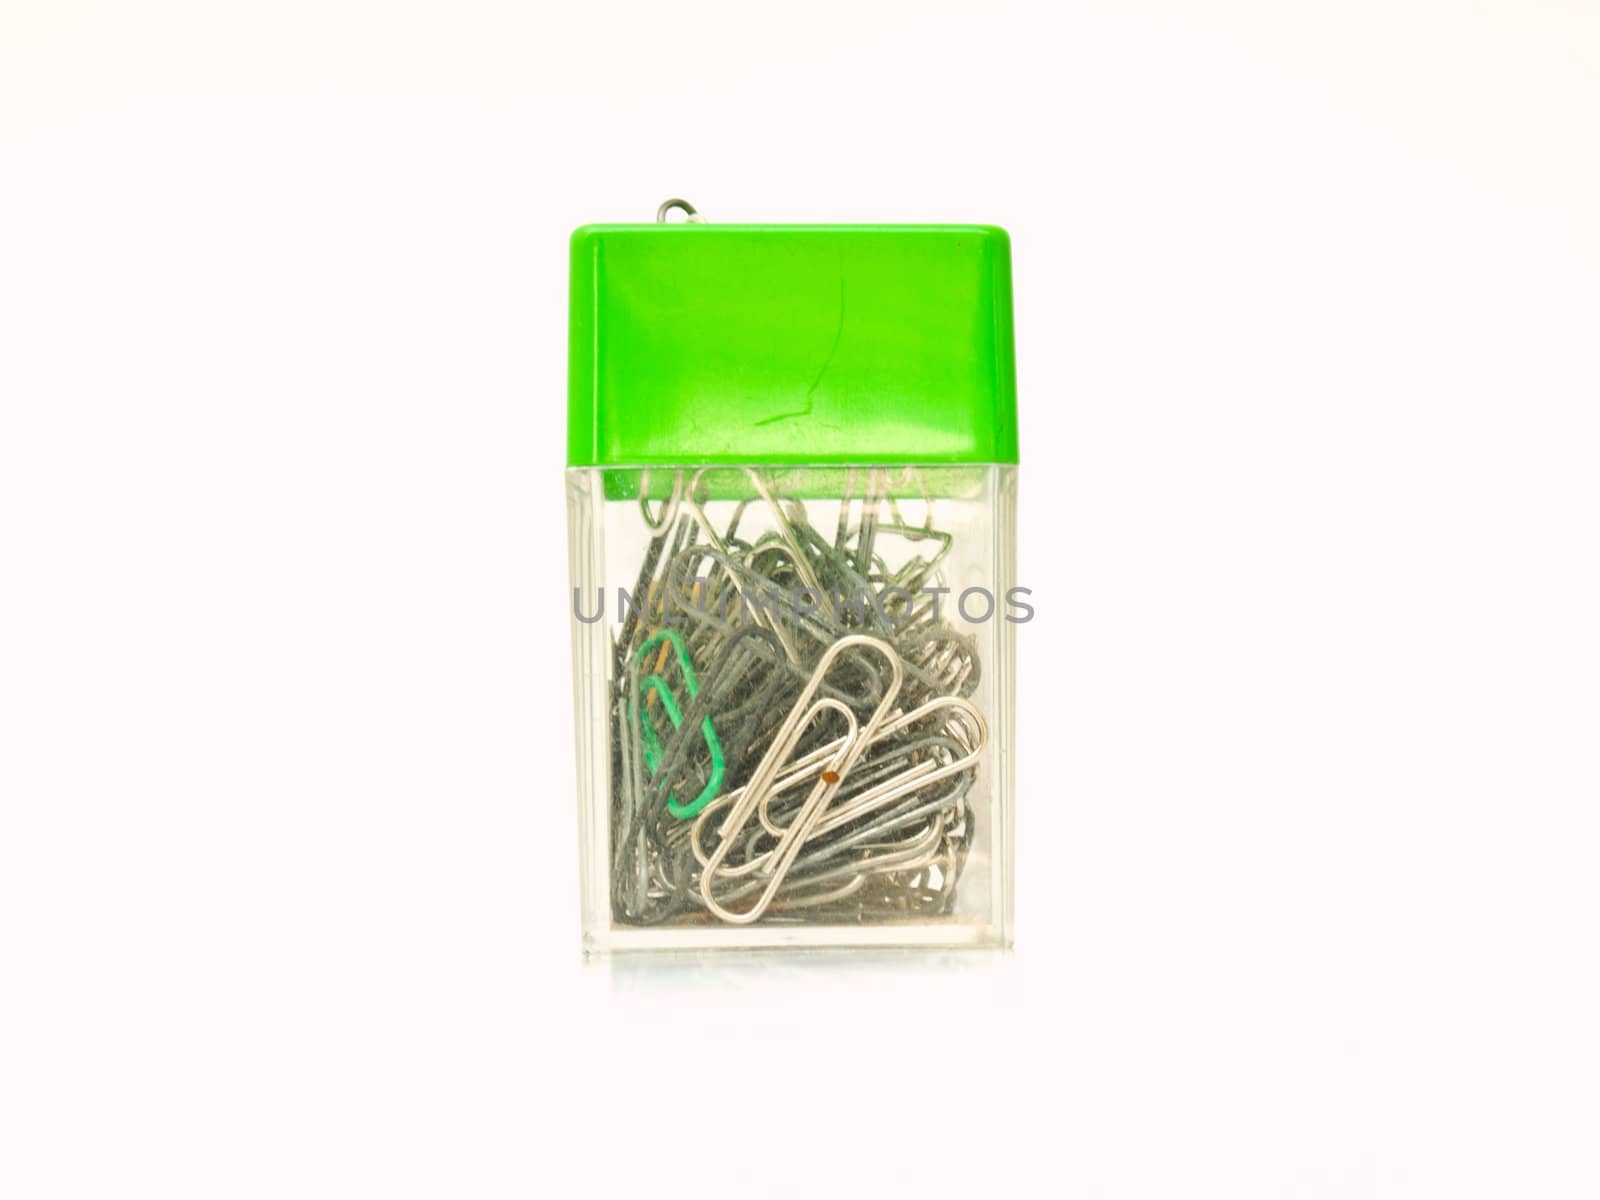 Used metal paper clips in used plastic container